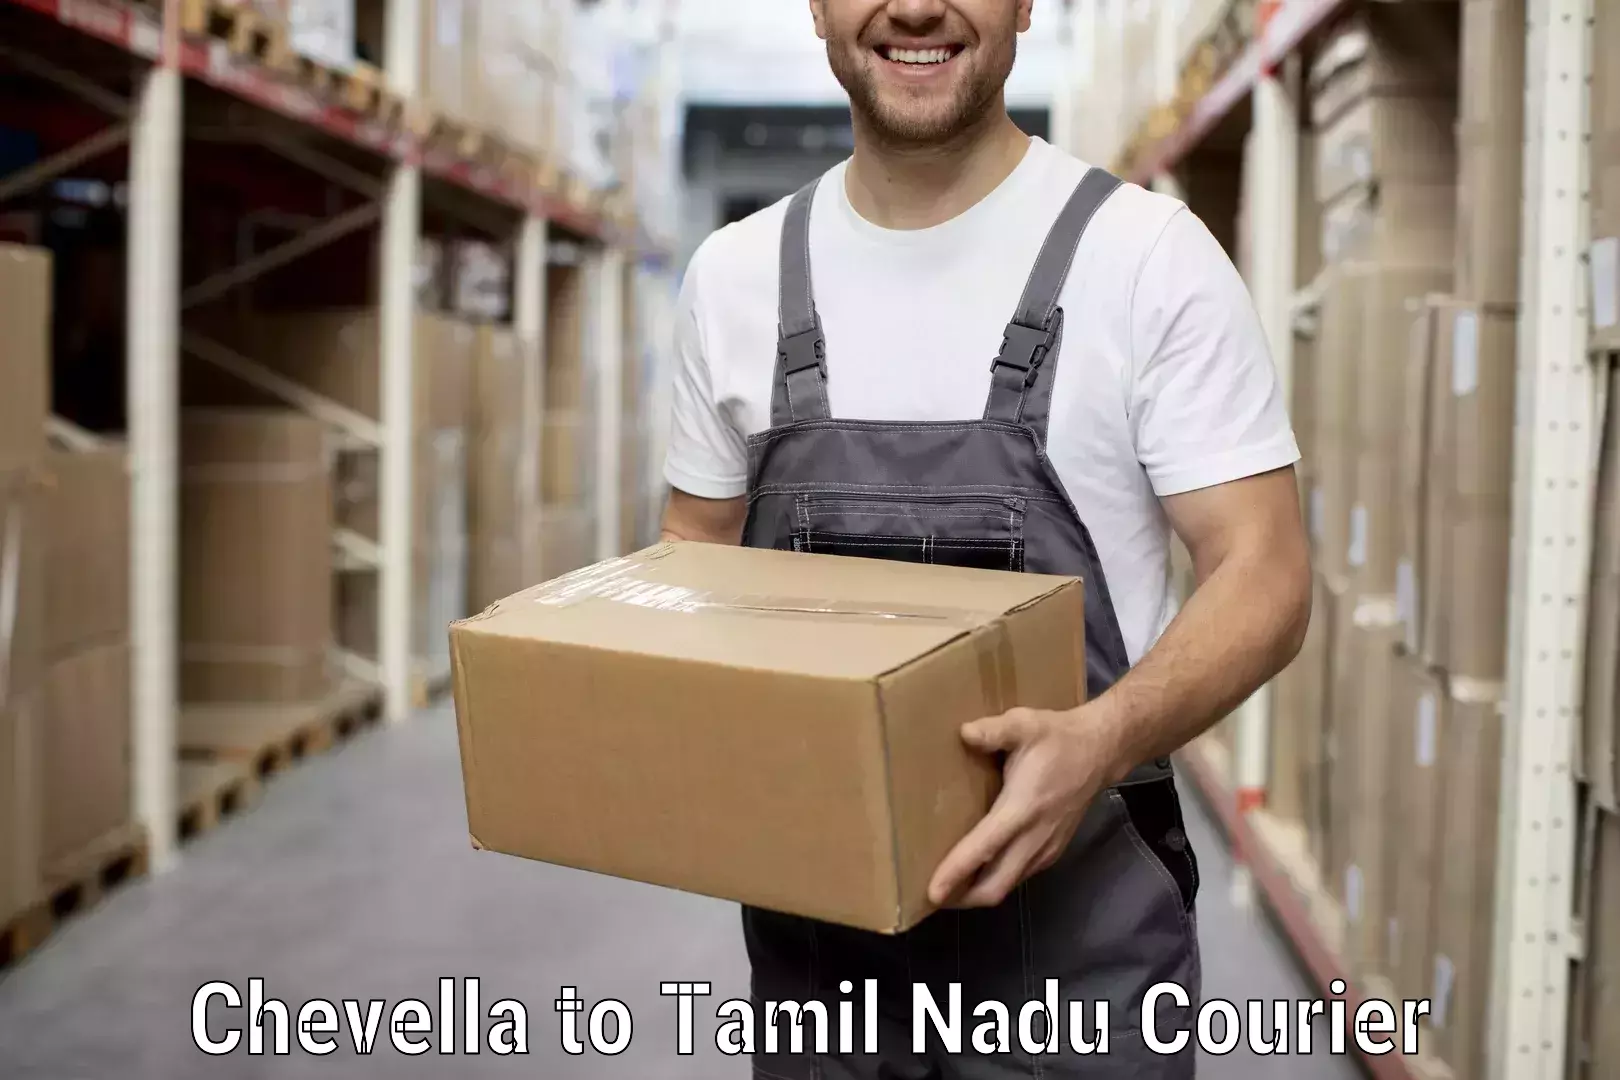 Furniture transport services Chevella to Meenakshi Academy of Higher Education and Research Chennai